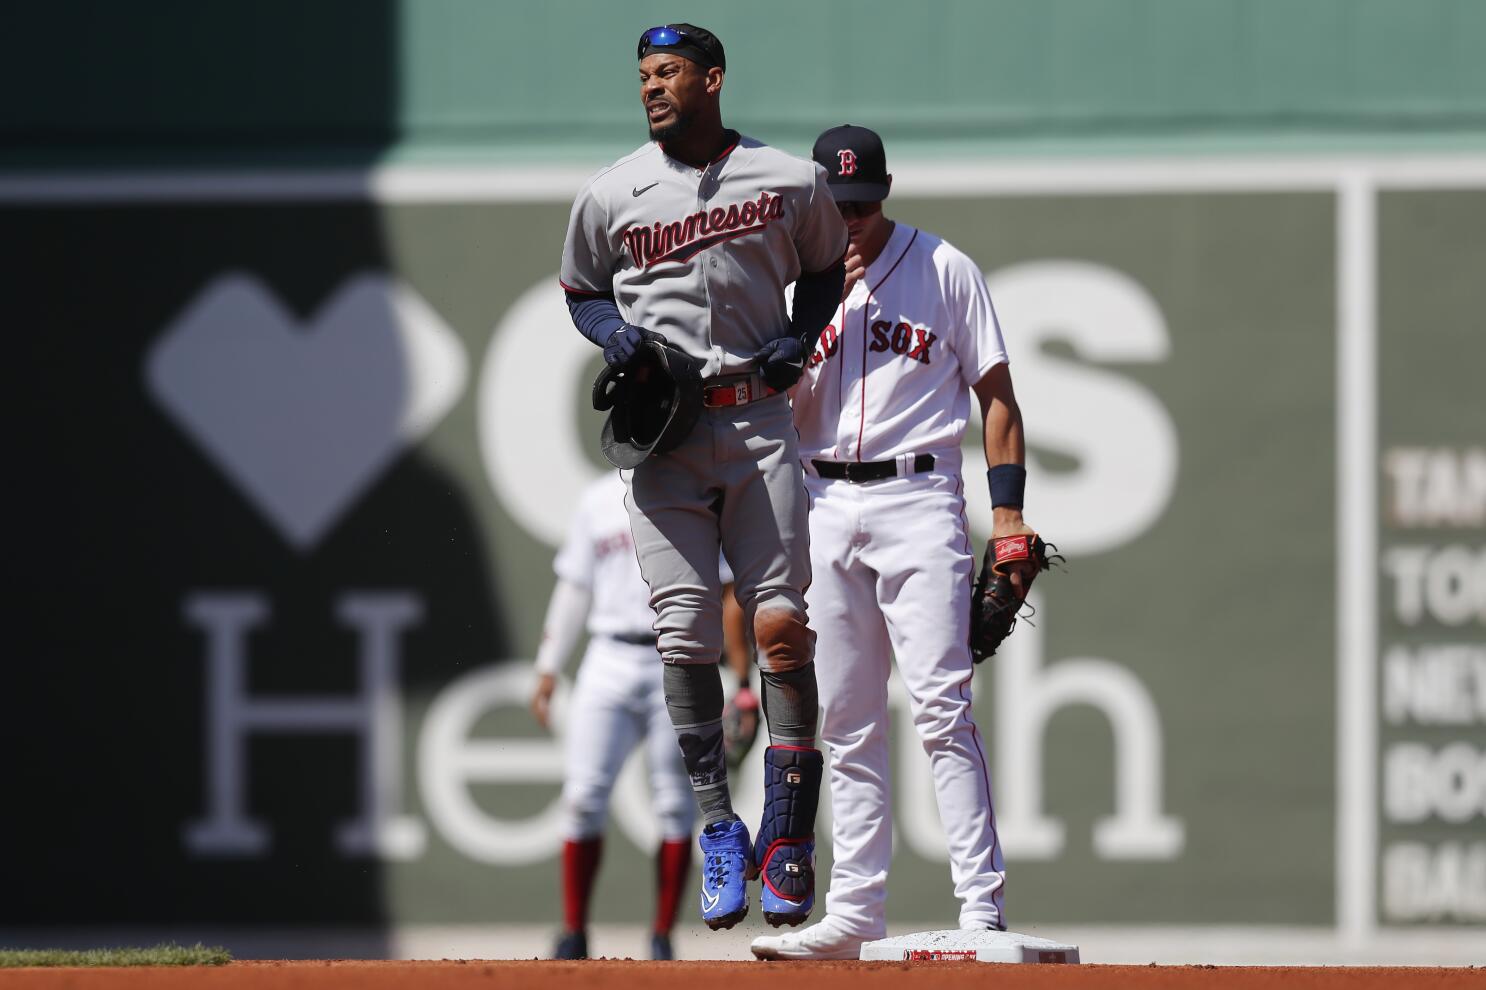 Byron Buxton Powers Minnesota Twins to Victory with 11th Home Run